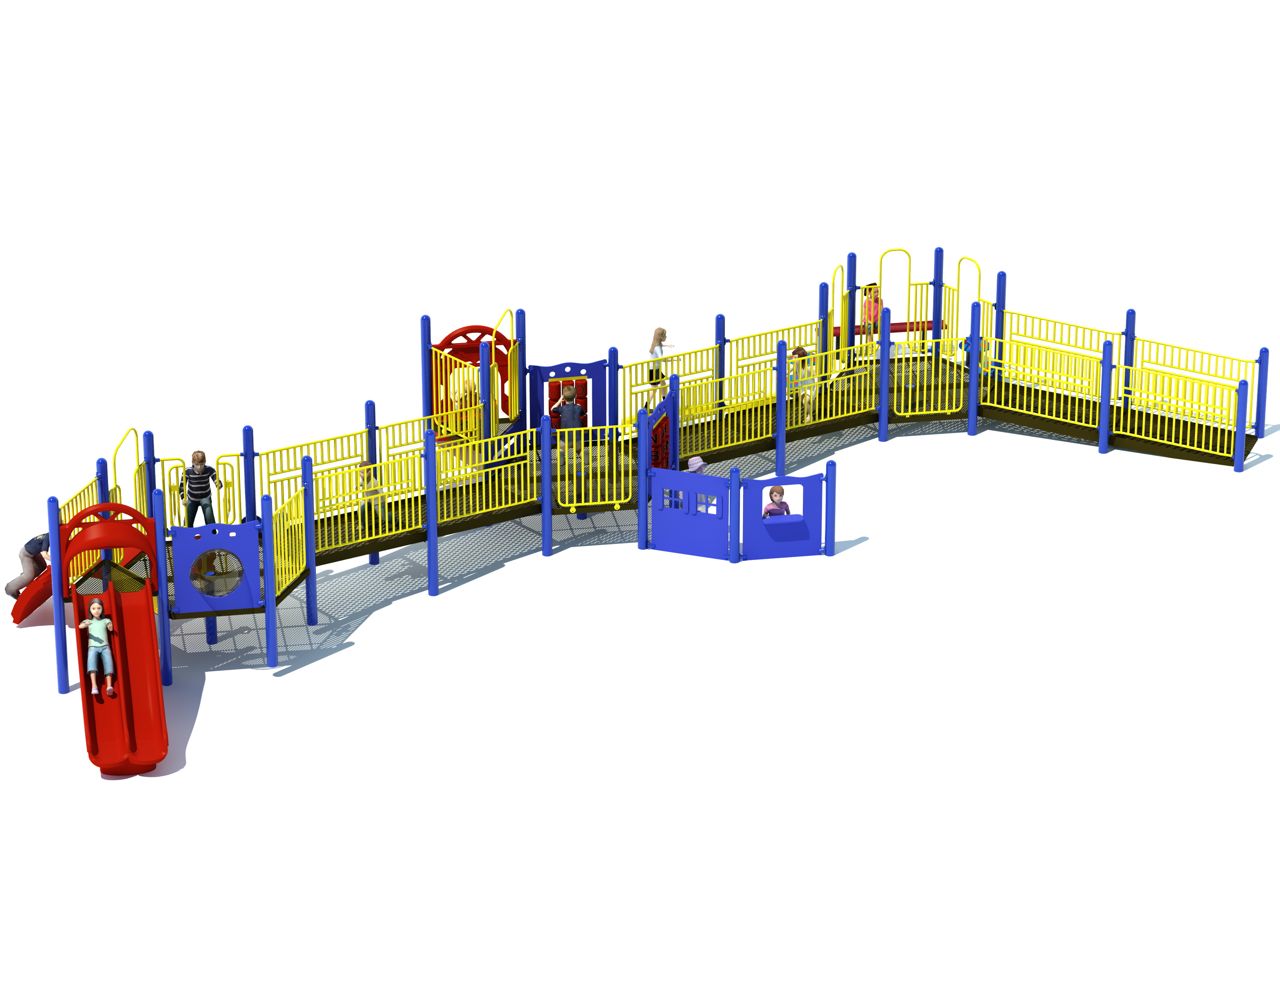 Shining Mountain Play System: Sii